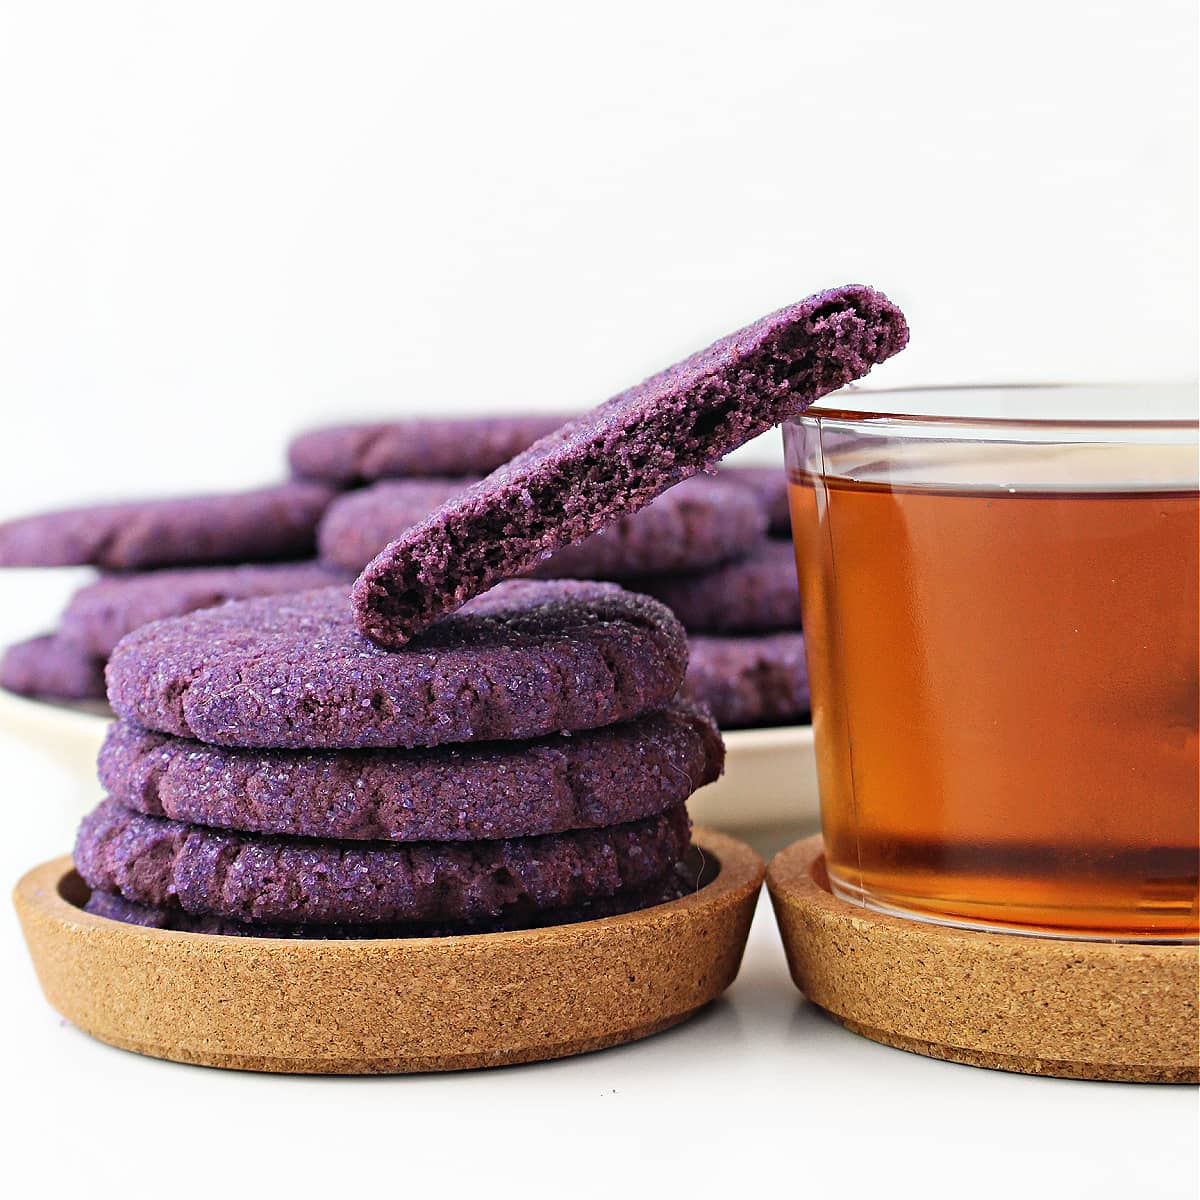 Stack of purple sugar cookies showing thick edge and a cookie half showing interior crumb.